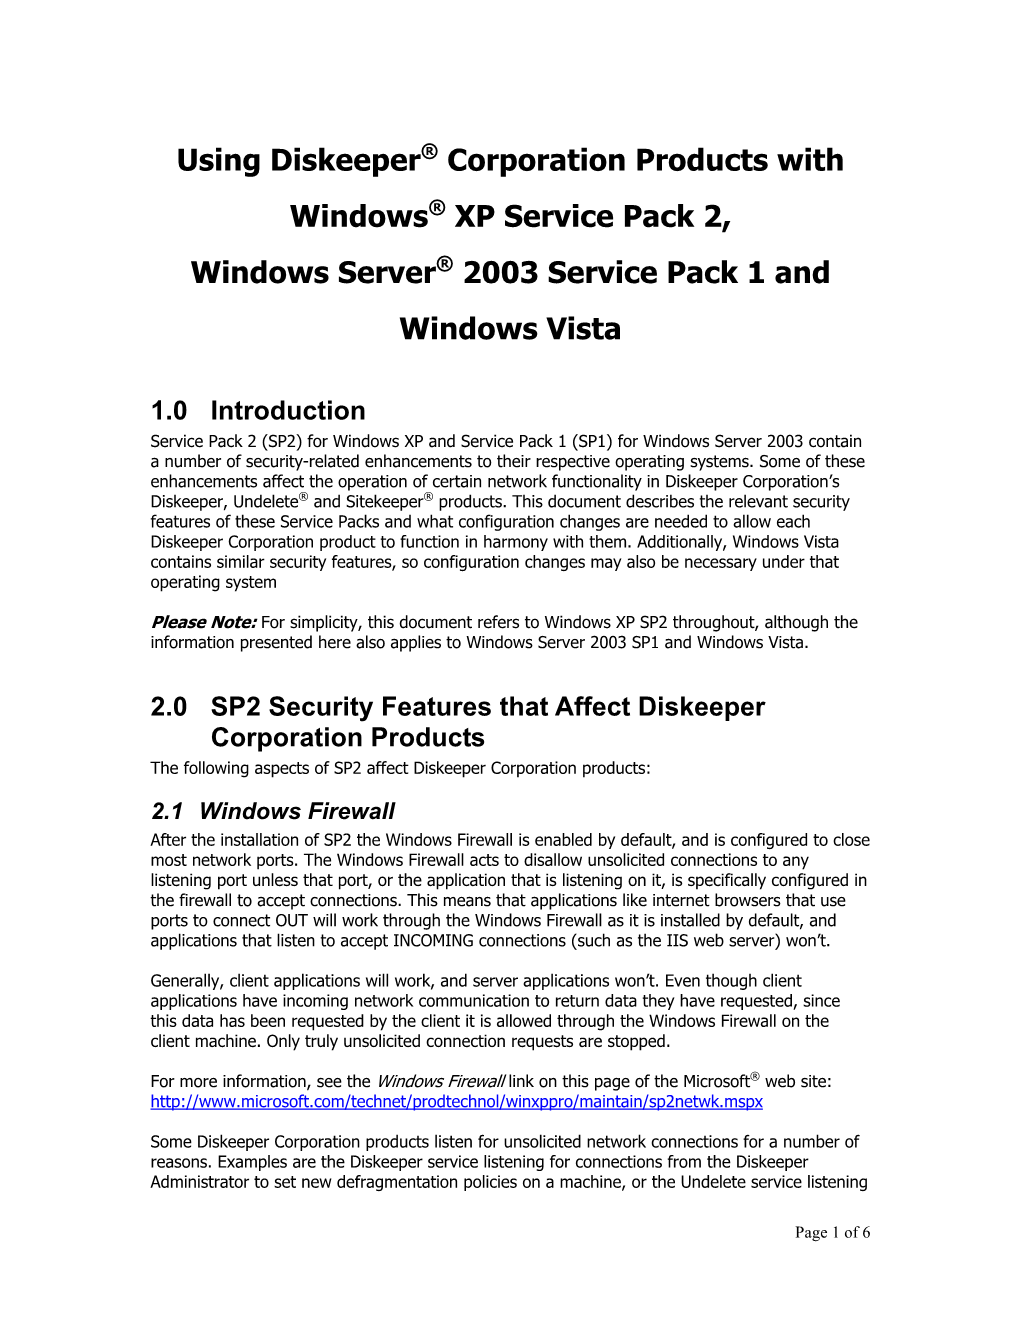 Using Executive Software Products with Windows XP